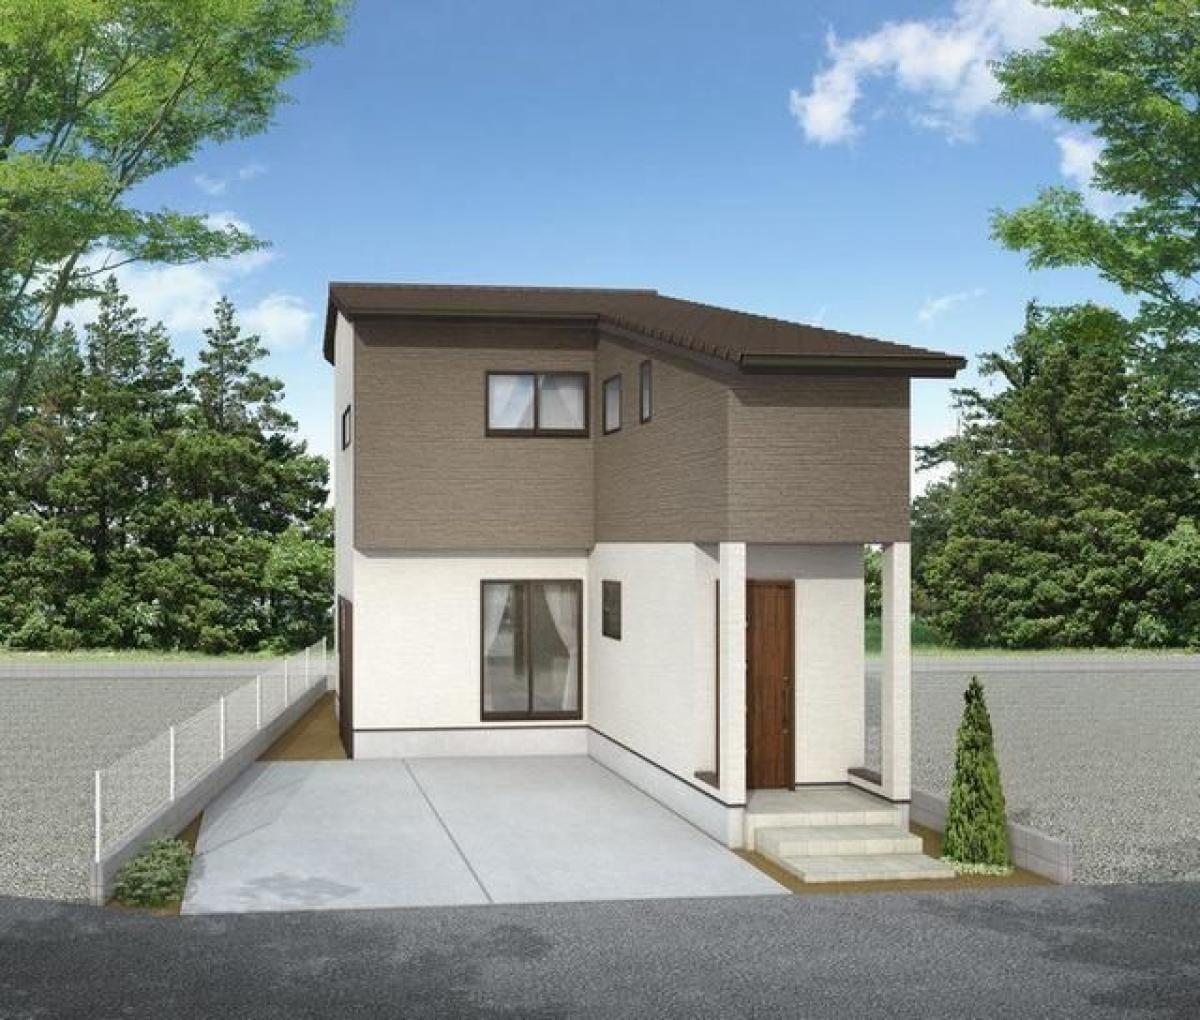 Picture of Home For Sale in Toyama Shi, Toyama, Japan